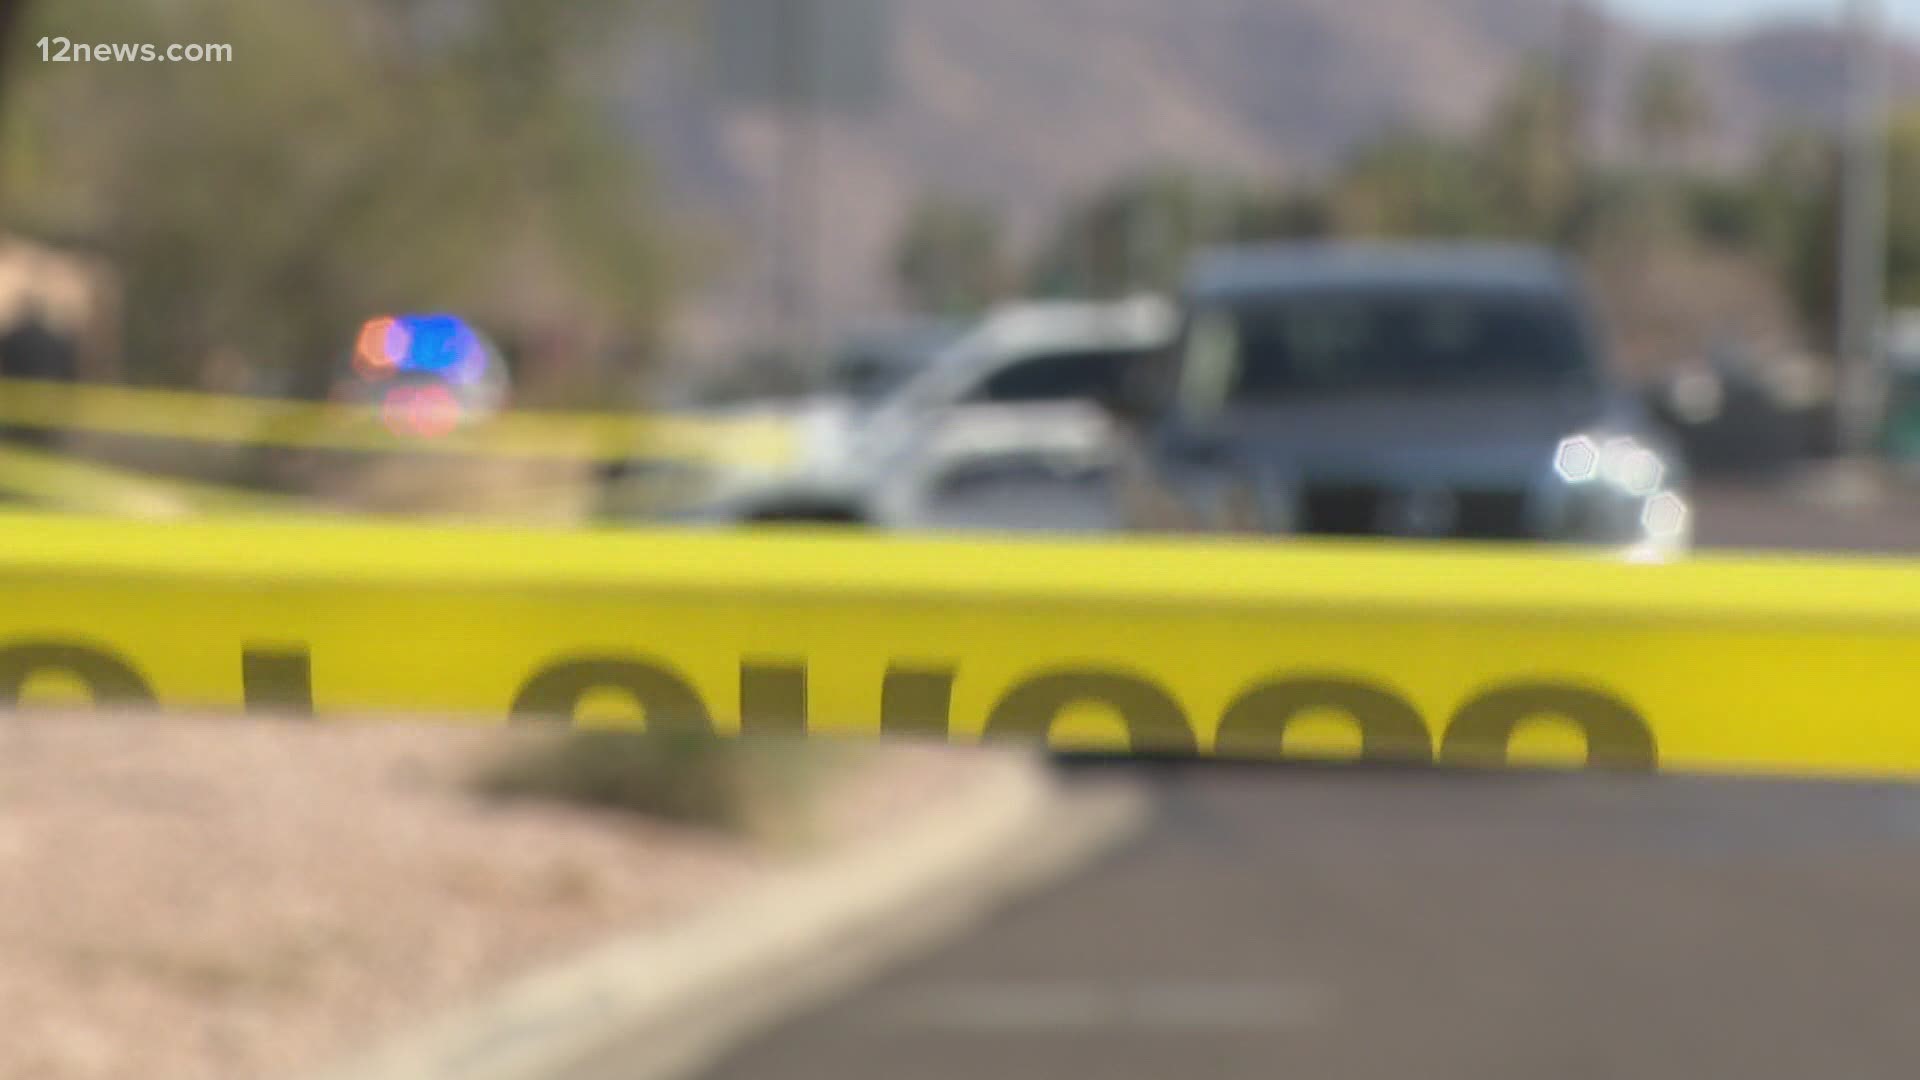 Phoenix police shot and killed a suspect after he allegedly broke into a woman's home near 43rd Avenue and Cactus Road.